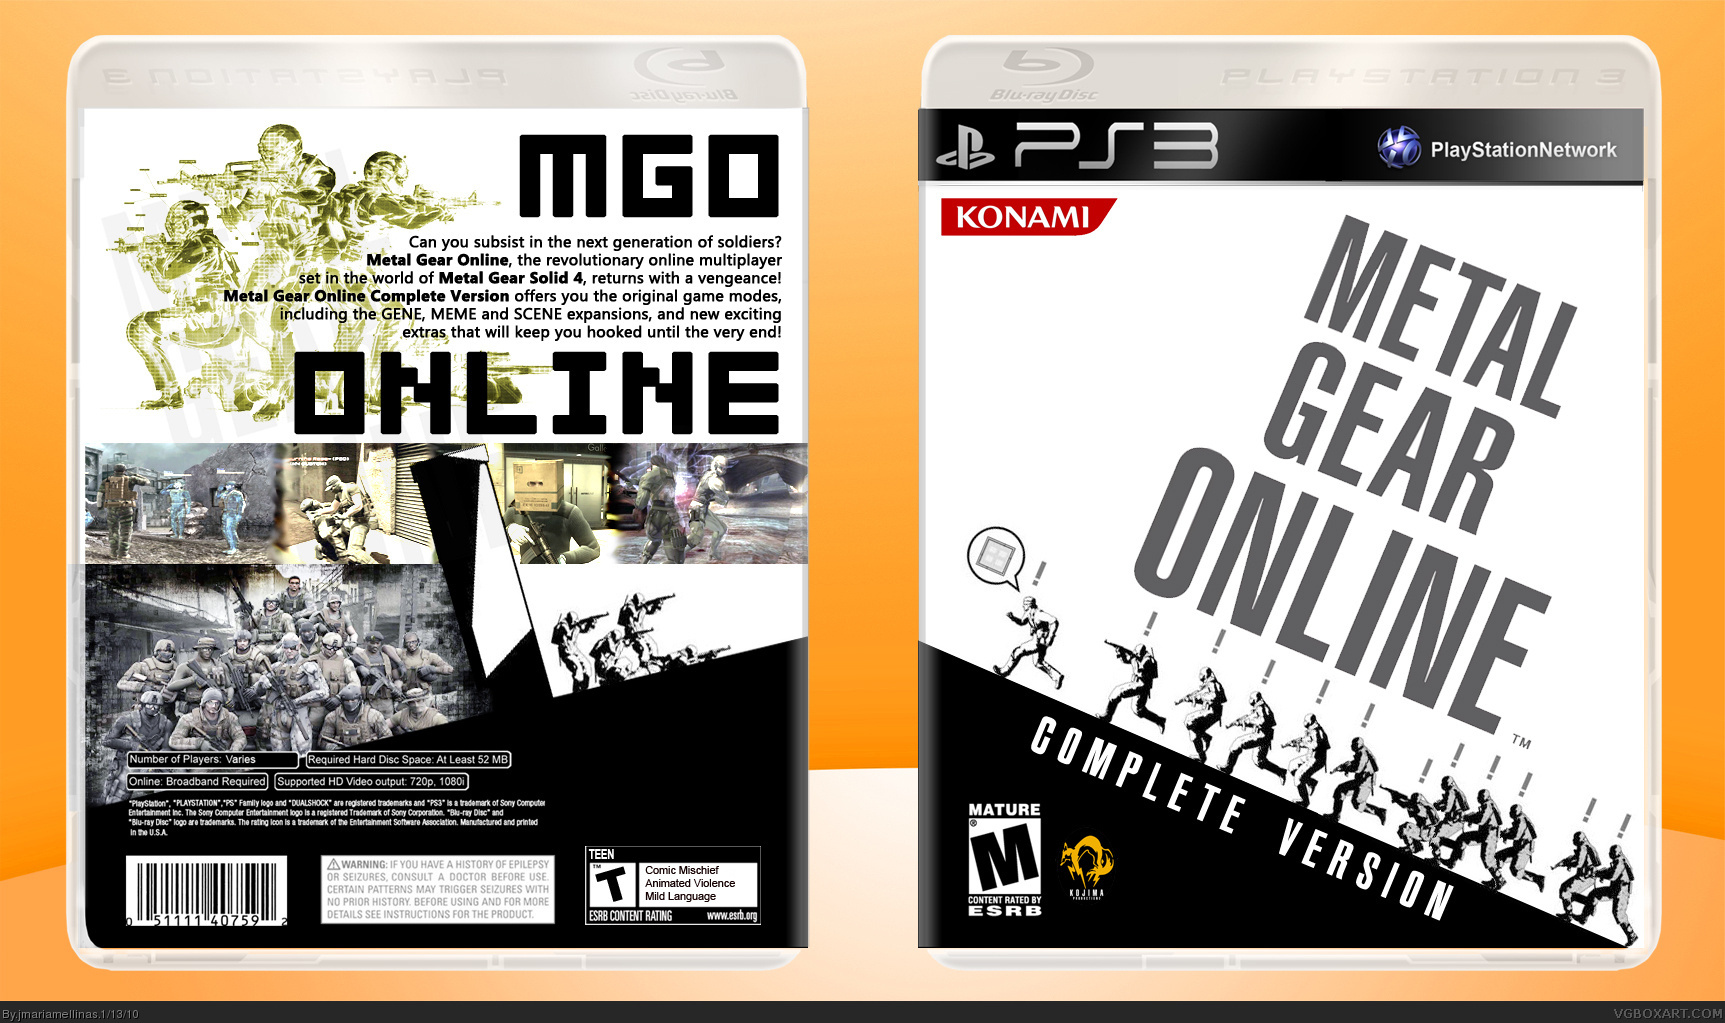 Metal Gear Online: Complete Version box cover